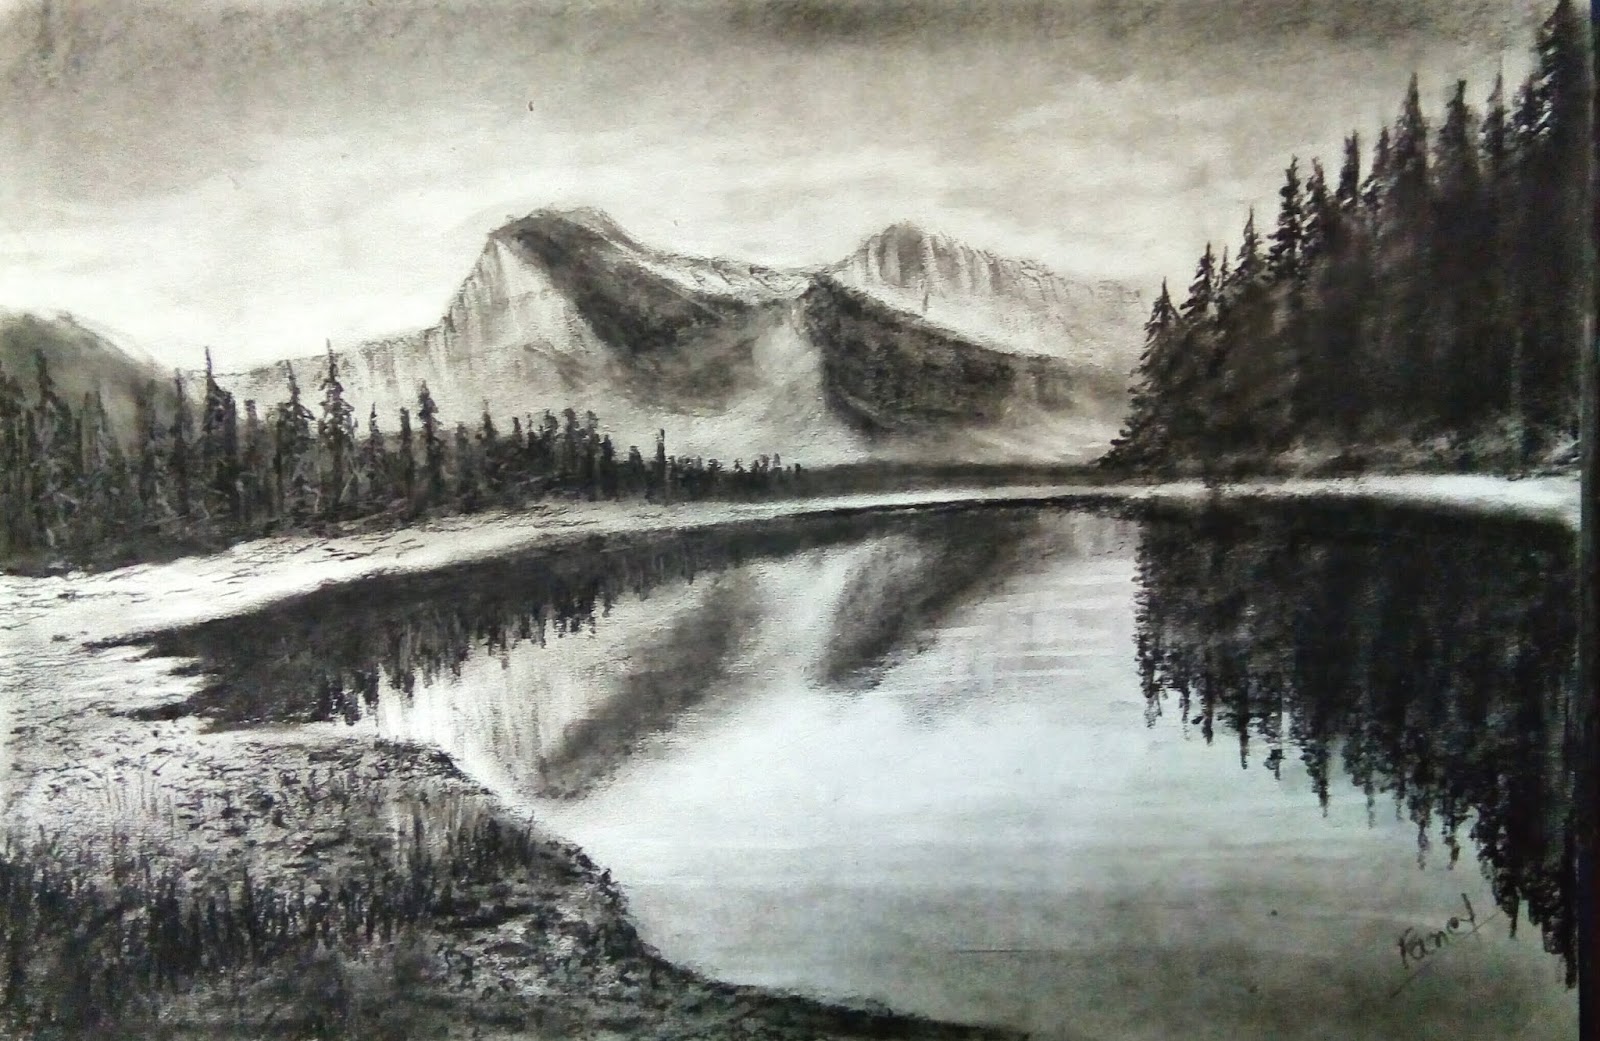 Charcoal Pencil Drawing Tutorial For Beginners | A Beautiful Landscape